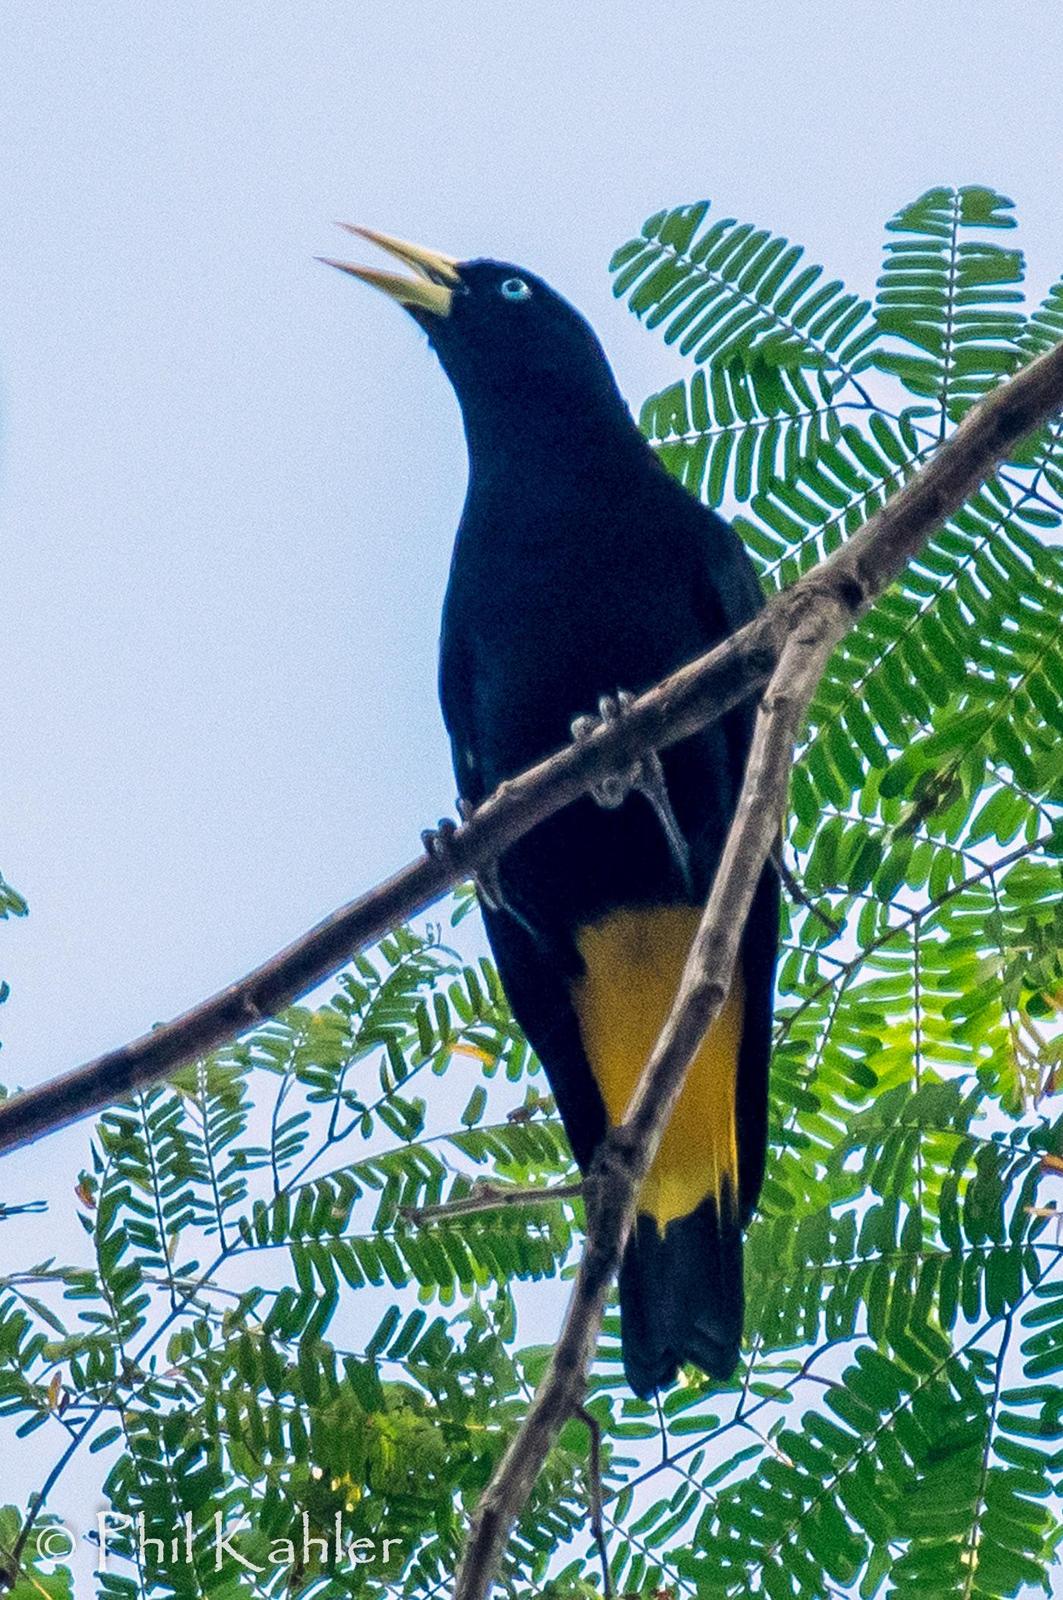 Yellow-rumped Cacique (Amazonian) Photo by Phil Kahler